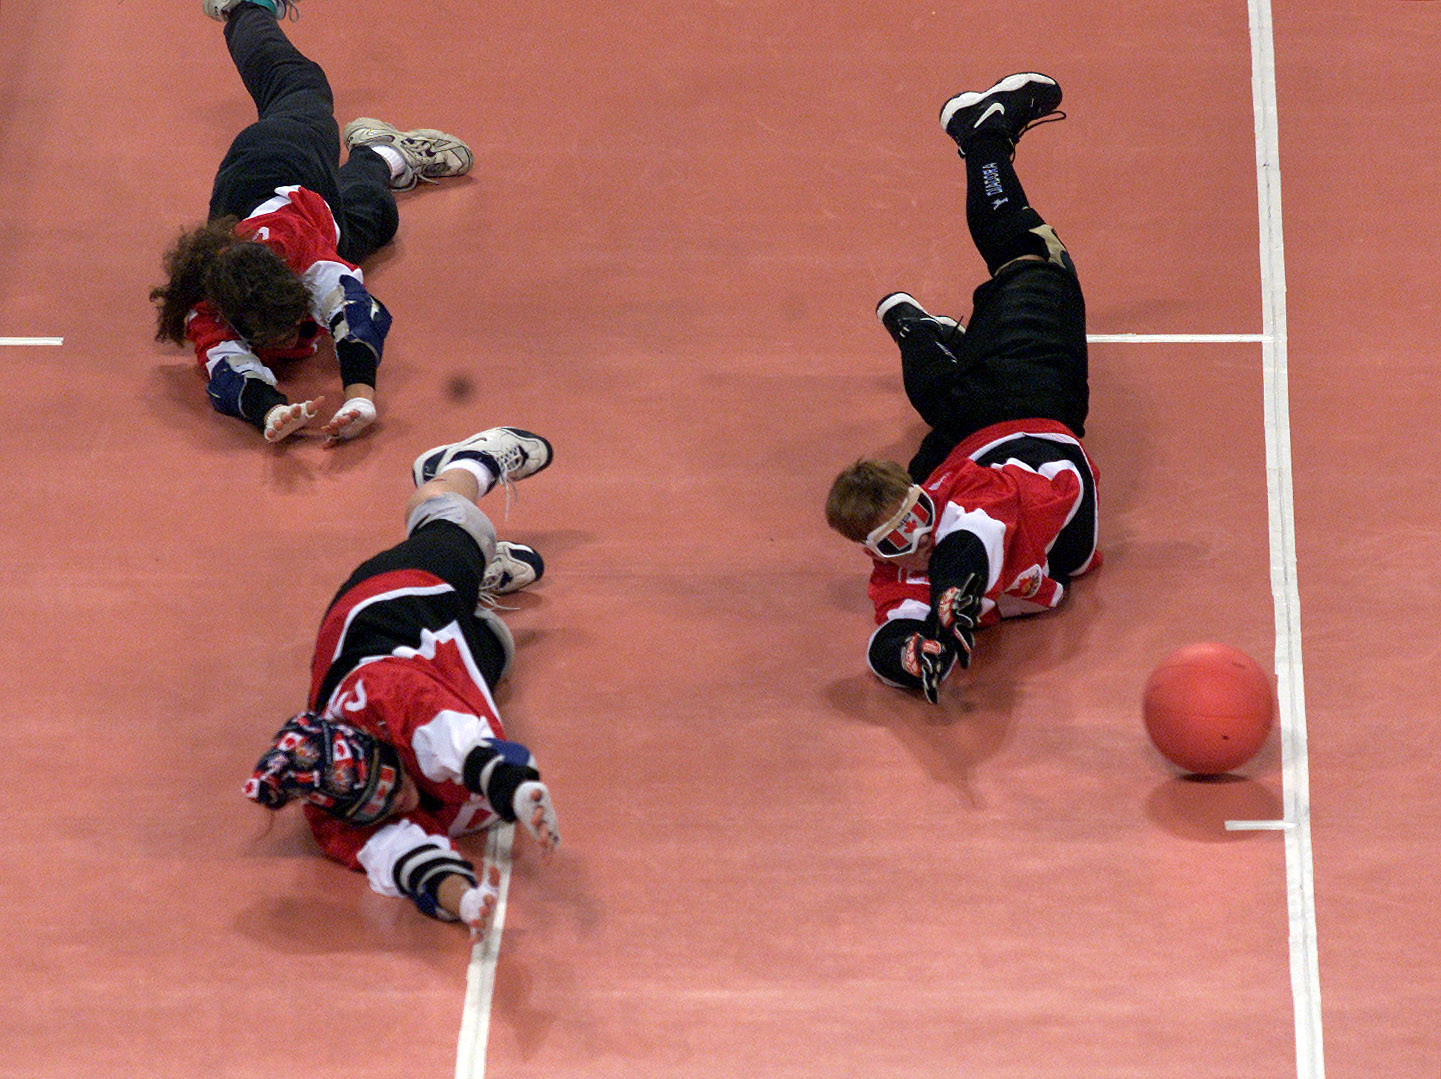 A new host is being sought for the IBSA Goalball World Championships ©Getty Images